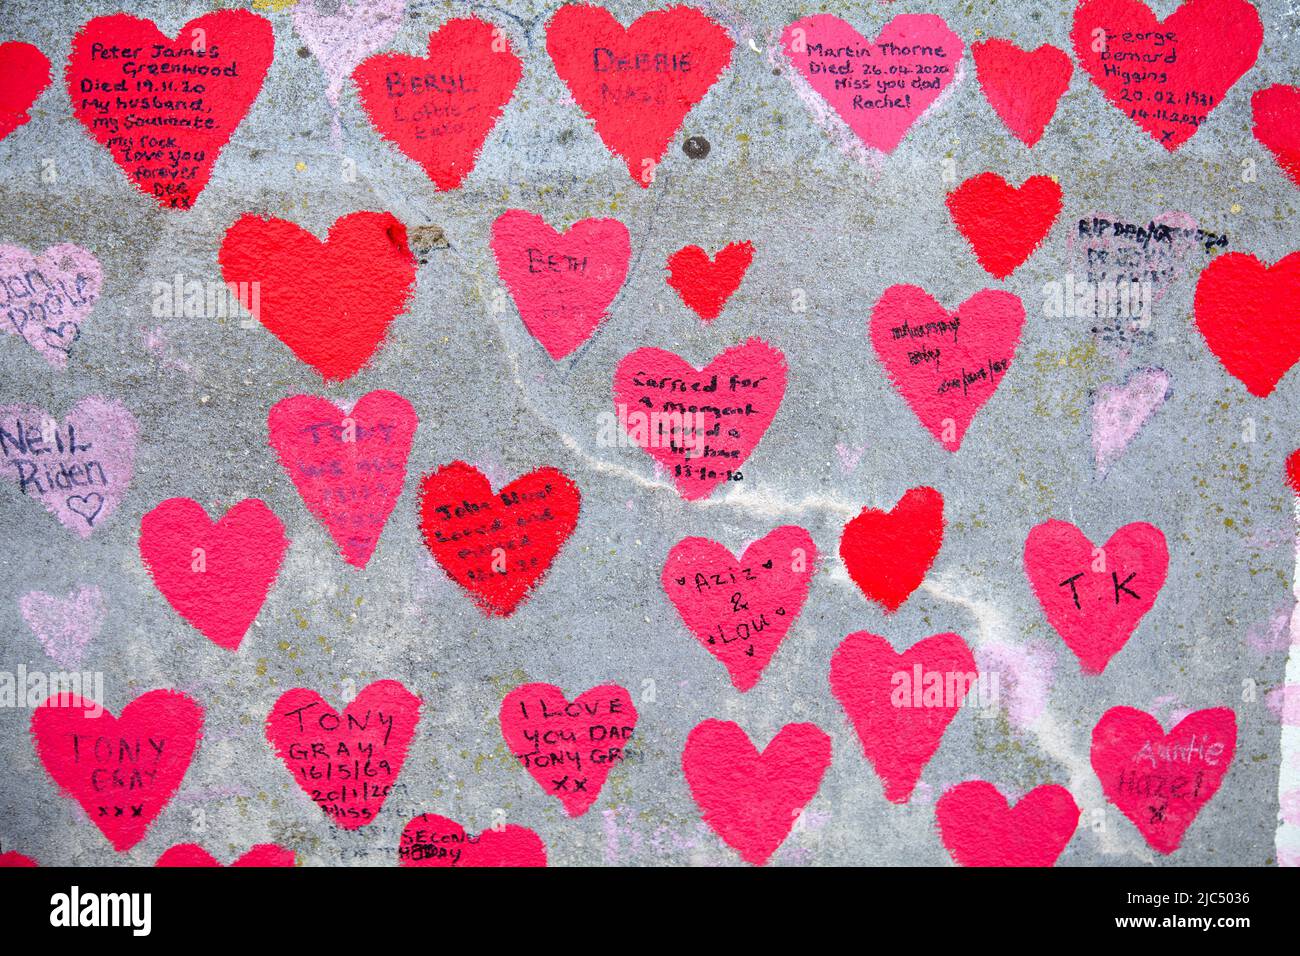 National Covid Memorial Wall on South Bank in London, Uk Stock Photo